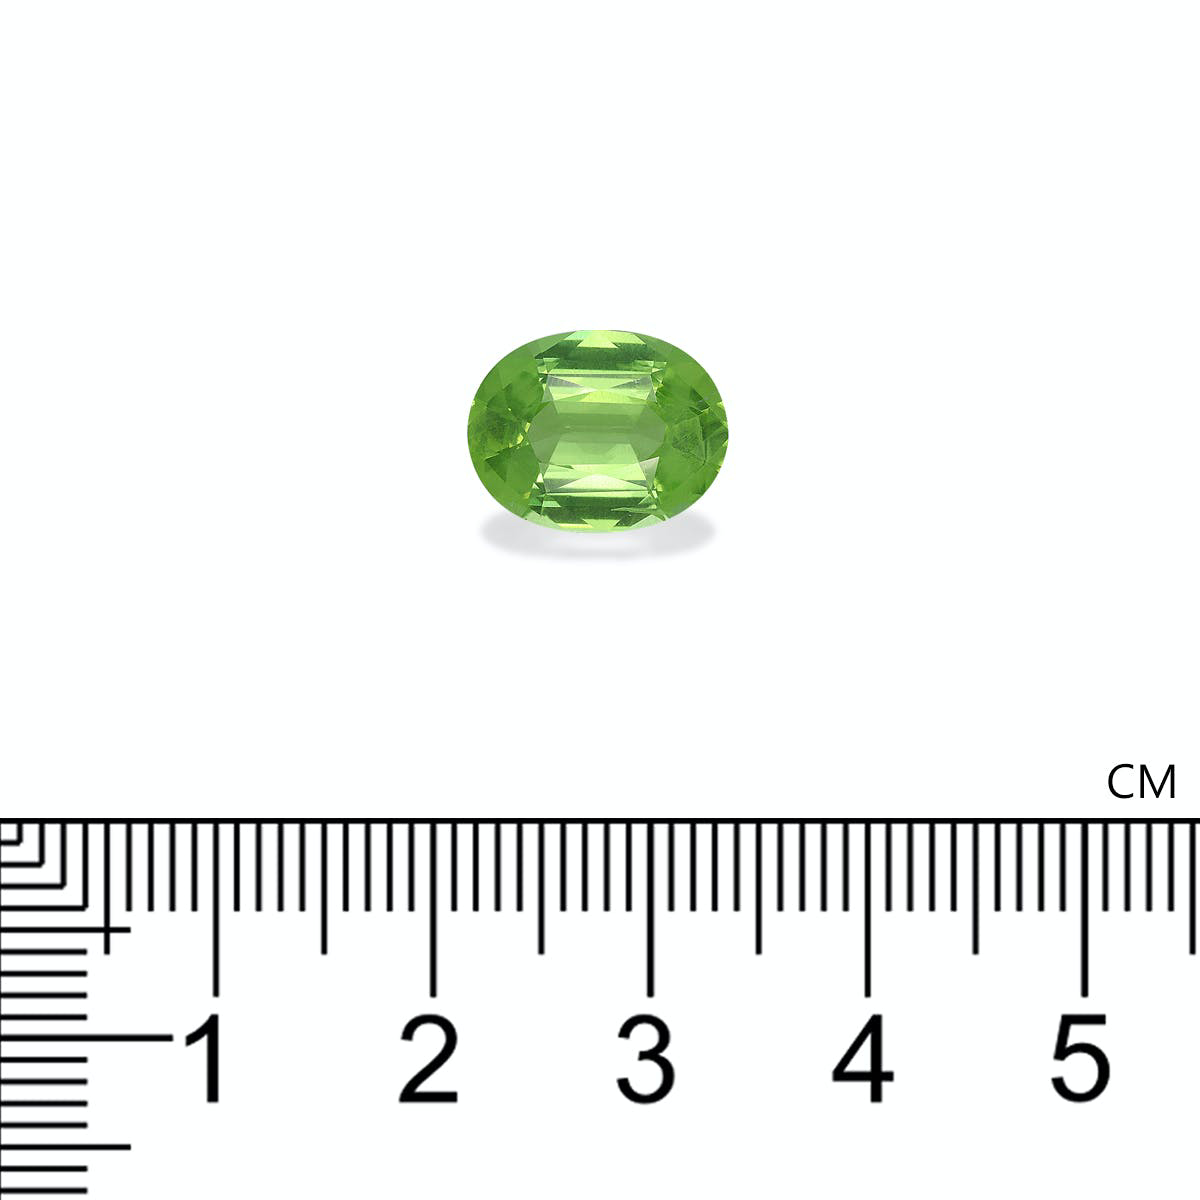 Picture of Lime Green Peridot 4.12ct (PD0104)